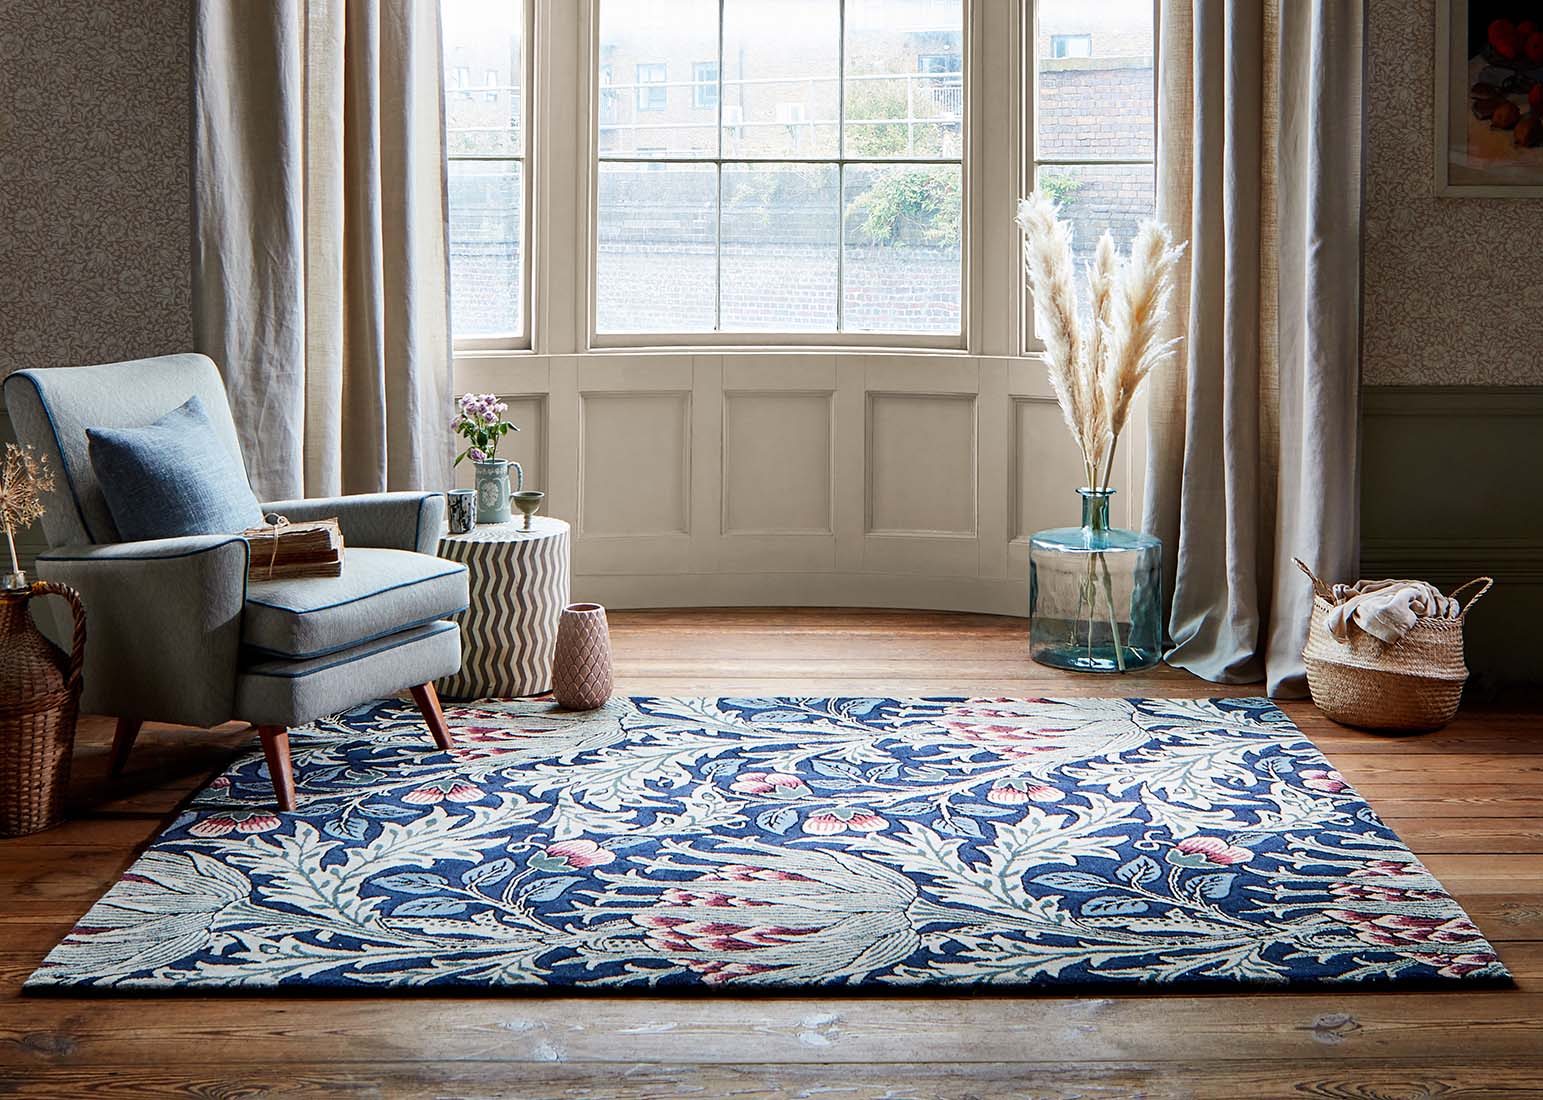 blue and red wool rug with floral print
